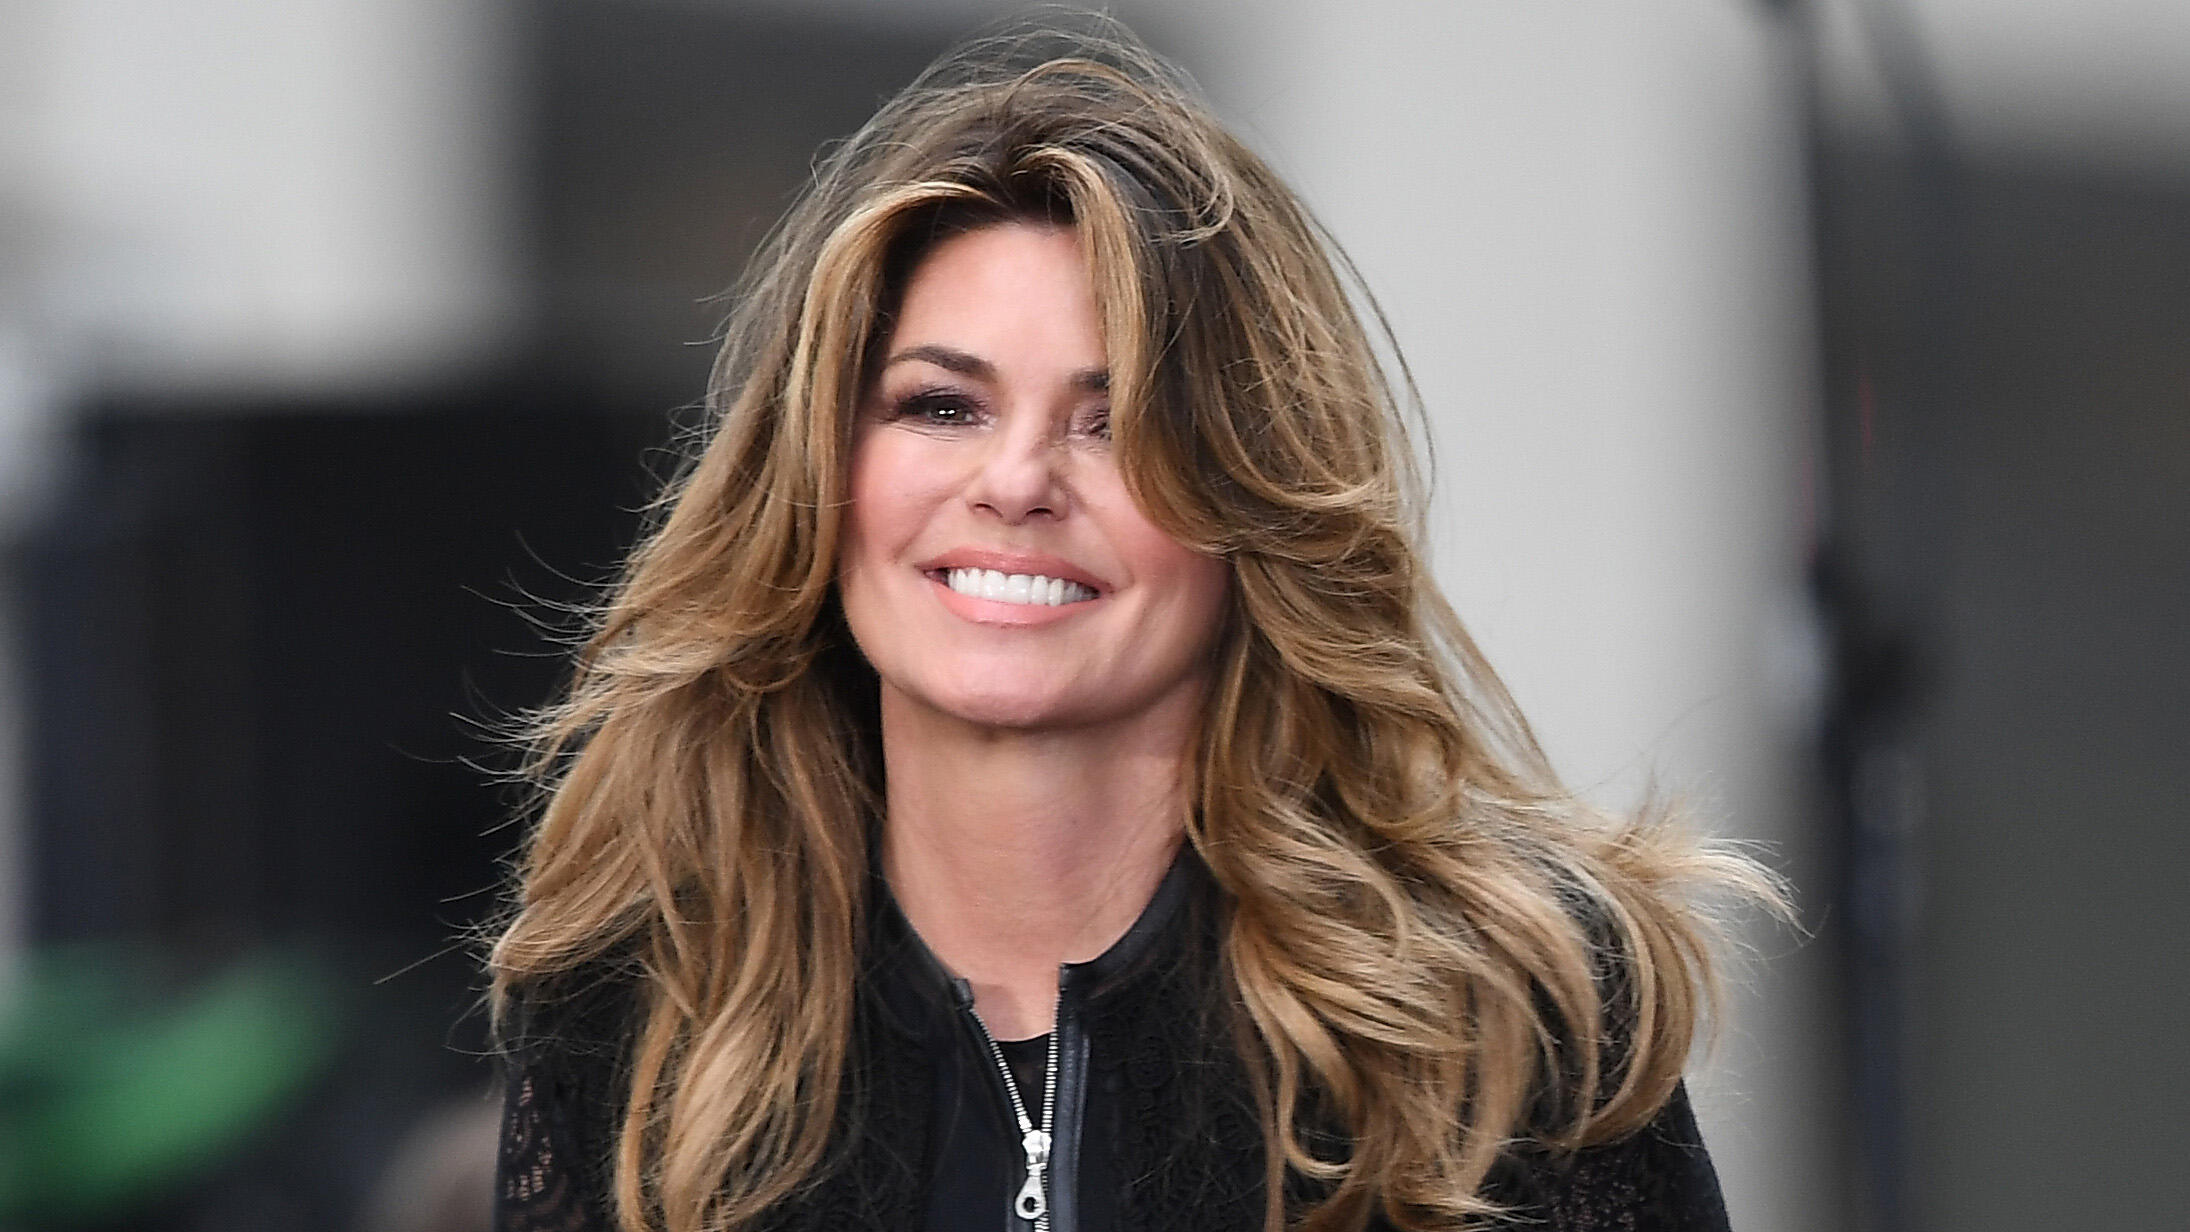 Shania Twain performs on NBC's 'Today' at Rockefeller Center on June 16, 2017 in New York City. / AFP PHOTO / ANGELA WEISS        (Photo credit should read ANGELA WEISS/AFP/Getty Images)